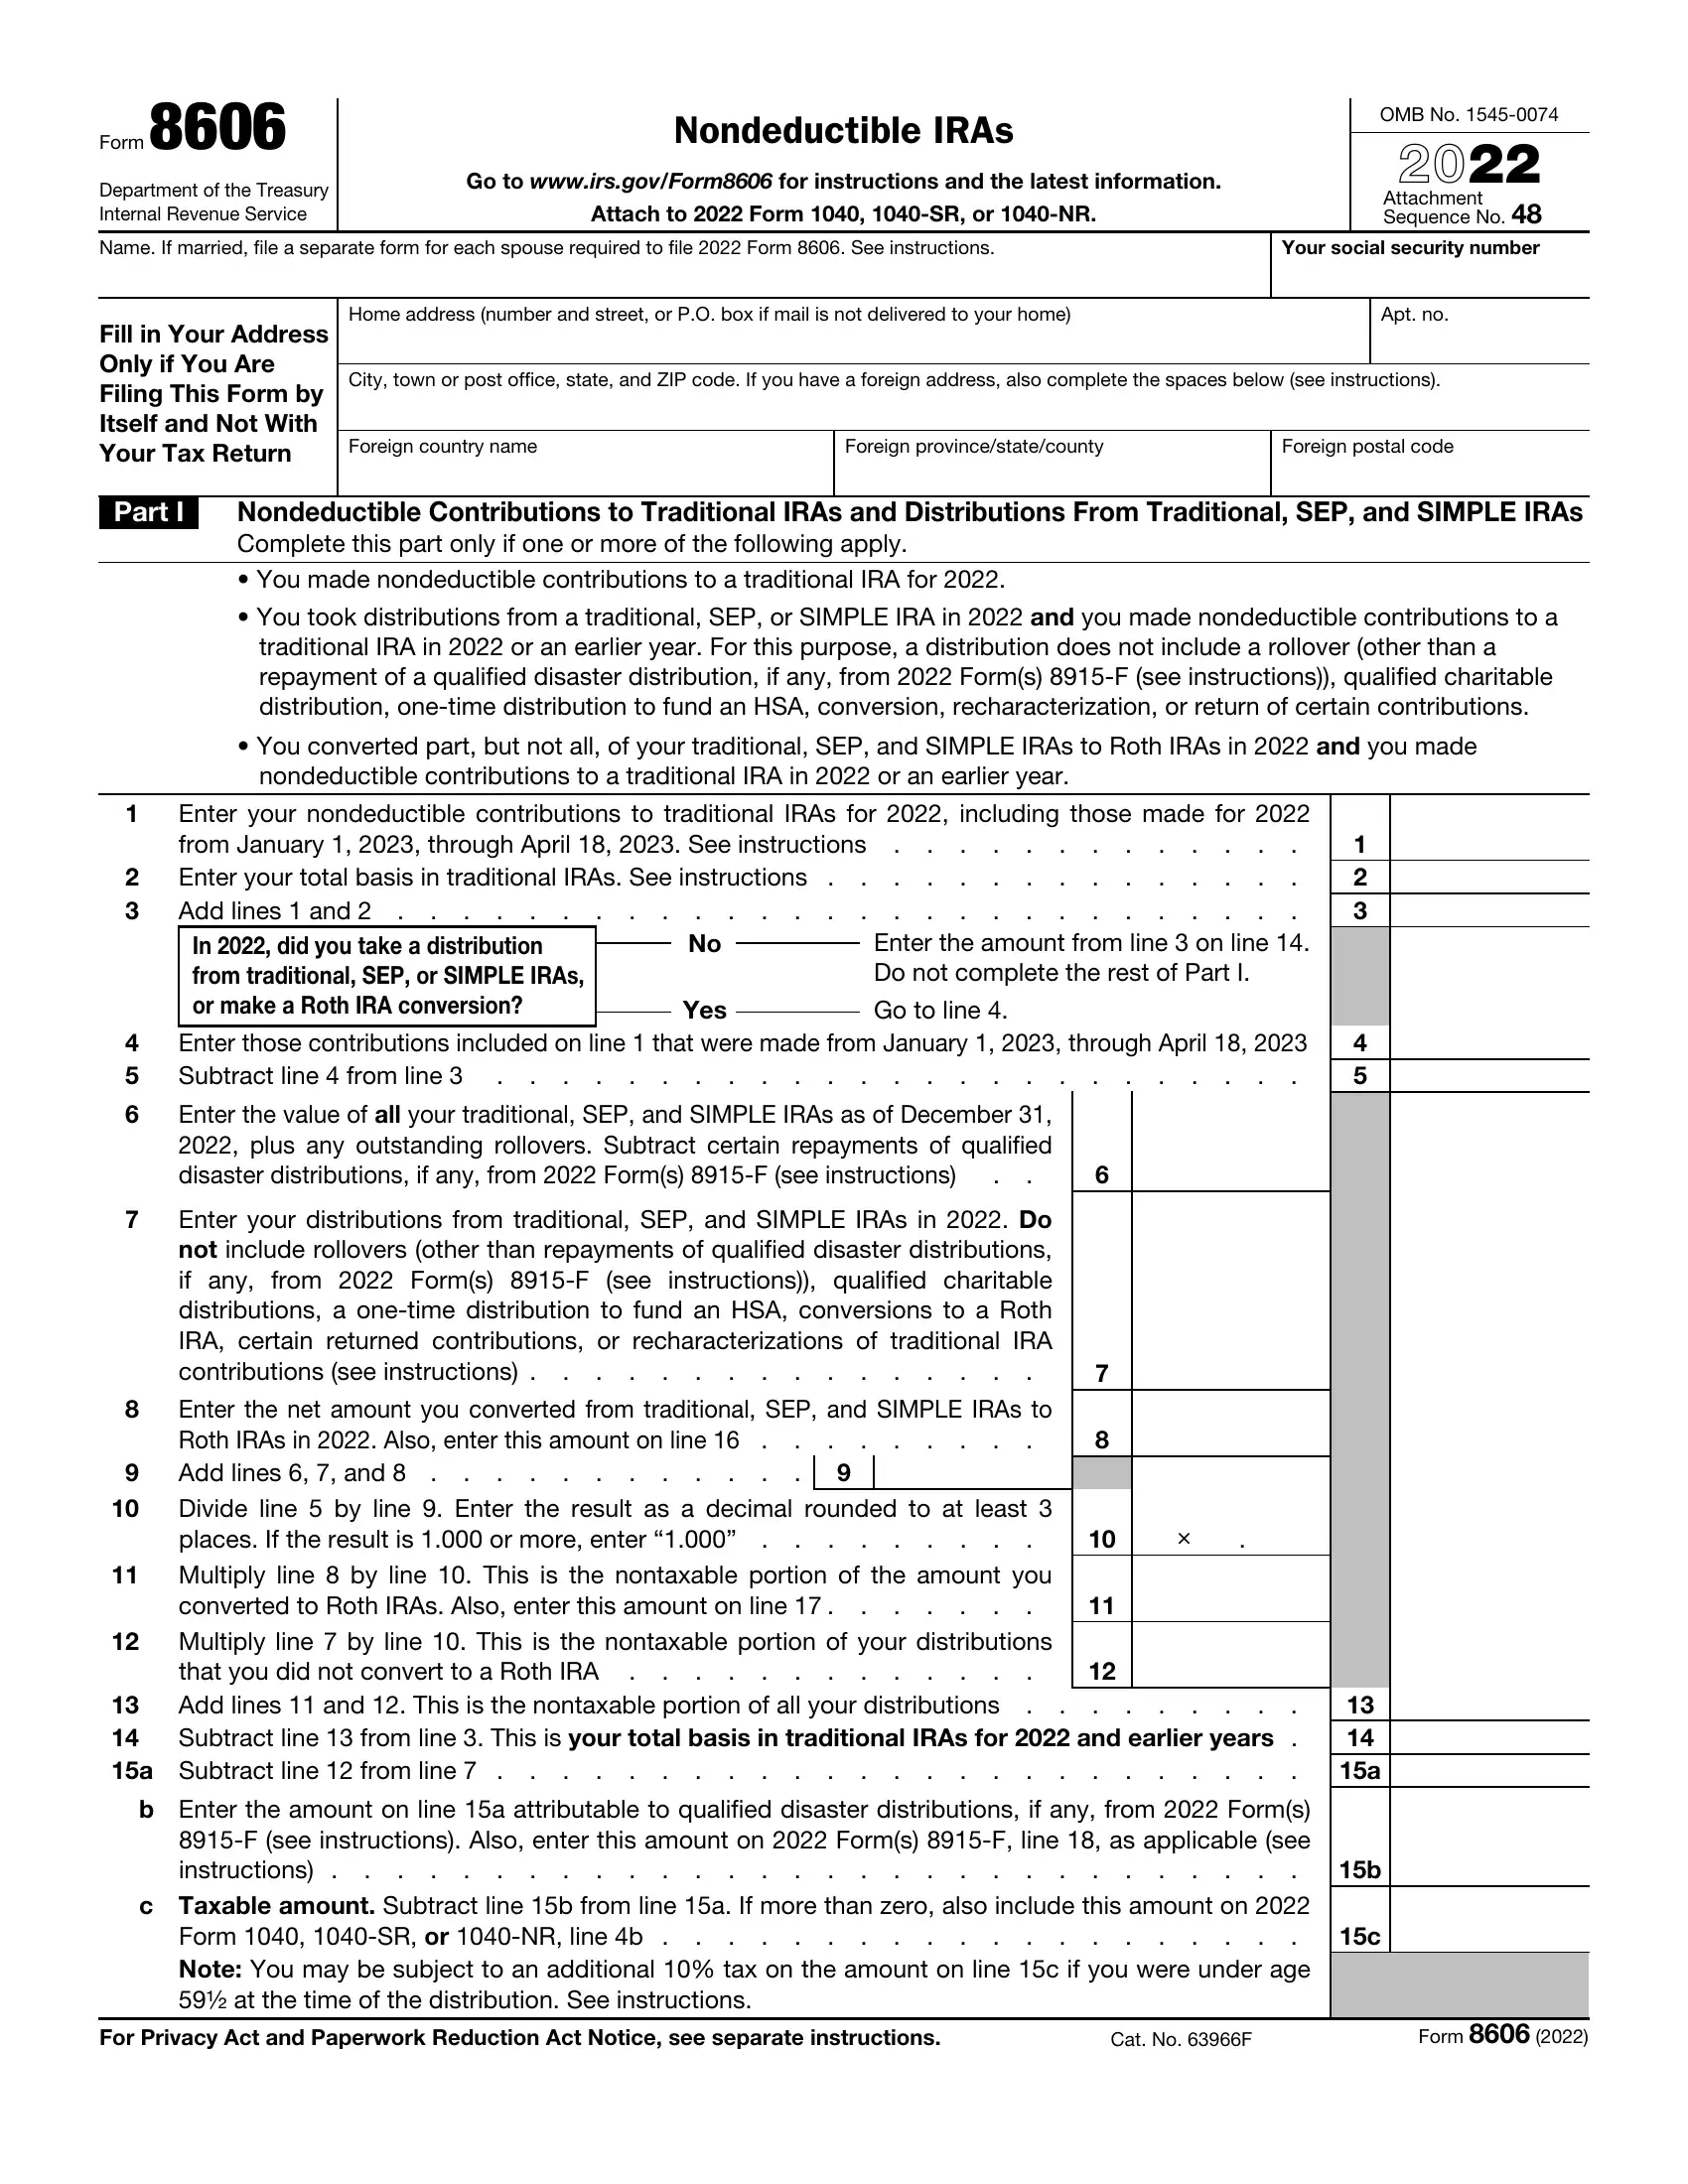 Best Western Card Authorization Form first page preview